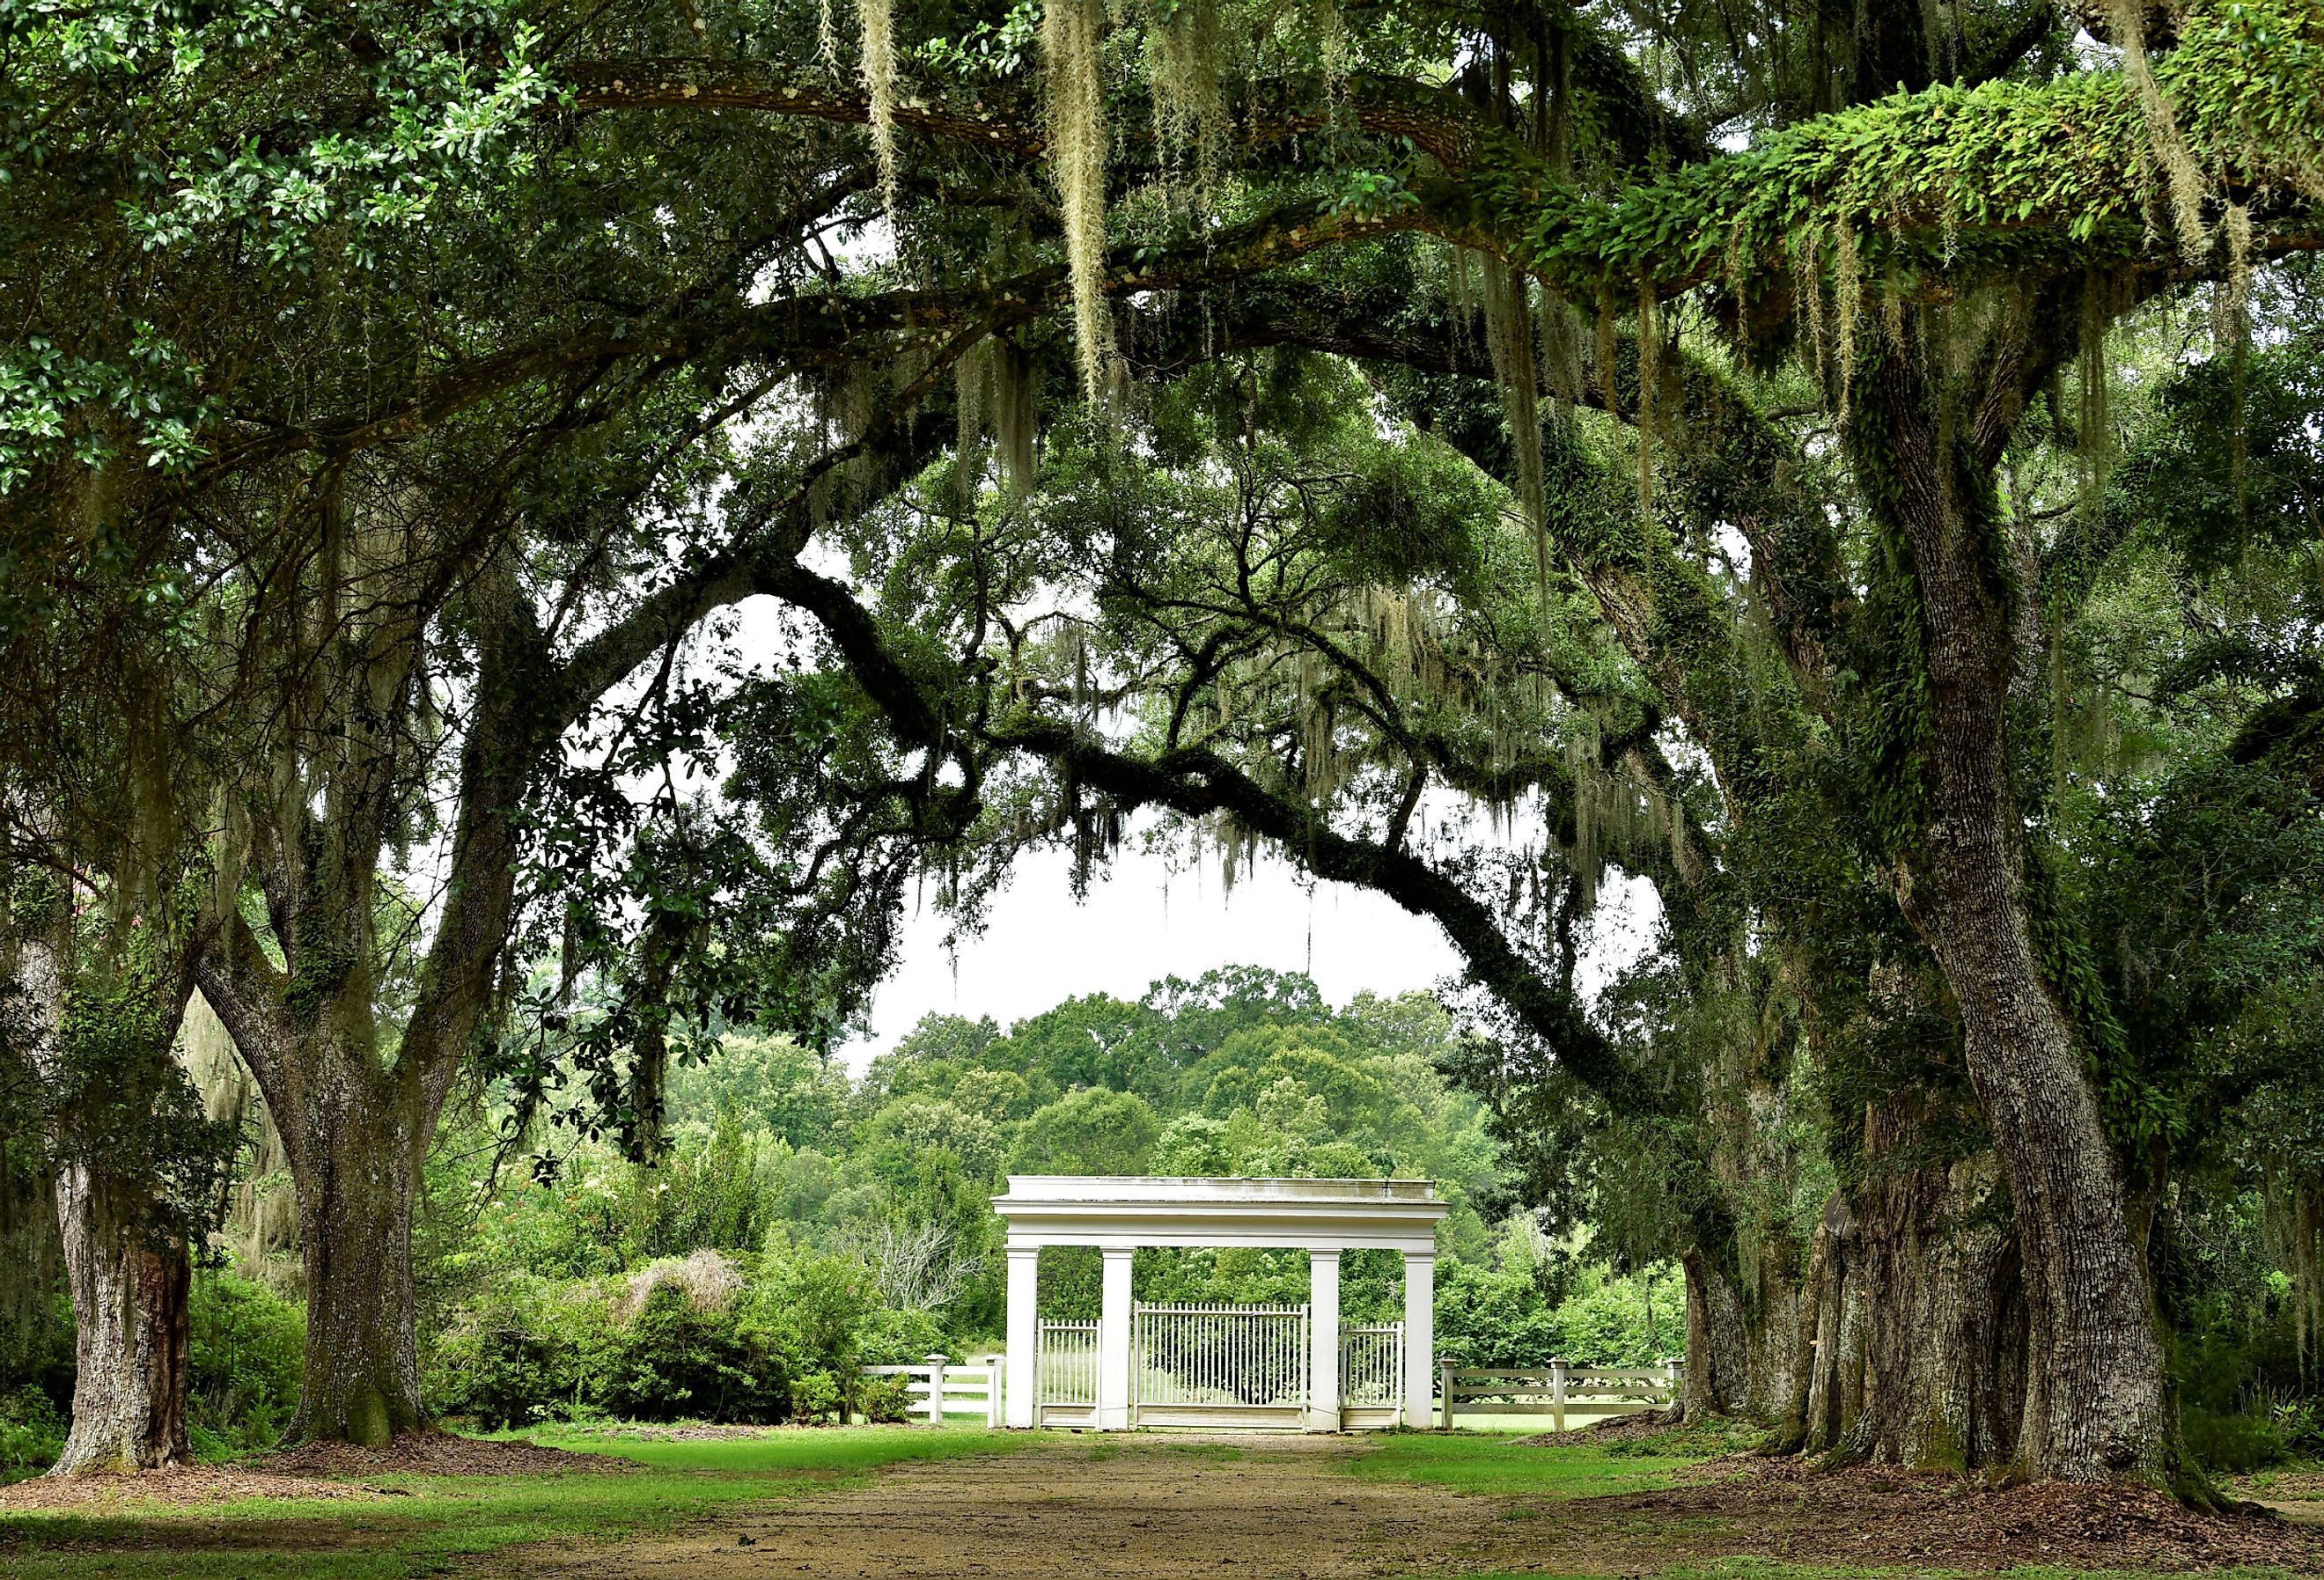 Canopy of Live Oak Branches over Entrance to Rosedown Plantation, State Historic Site, in St. Francisville, Louisiana. Image credit LindaPerez via Shutterstock